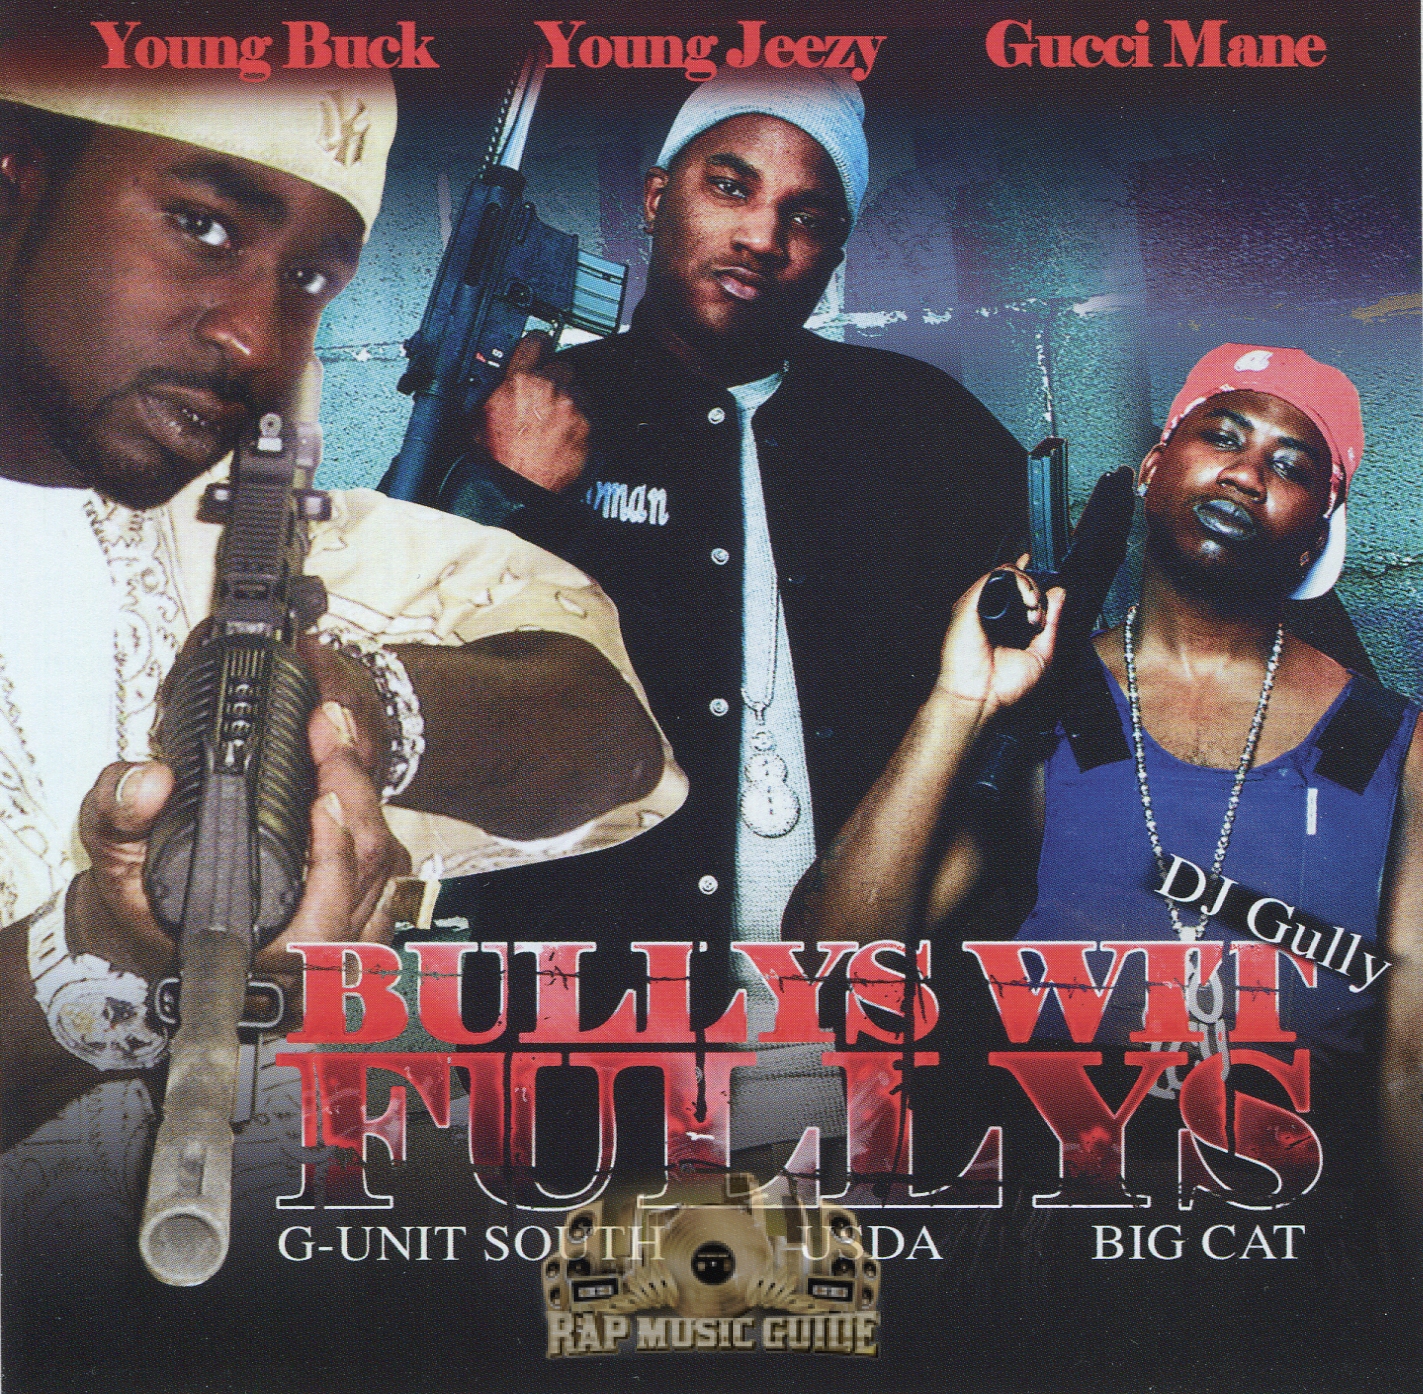 Young Buck, Young Jeezy & Gucci Mane - Bullys Wit Fullys: CD | Rap Music  Guide